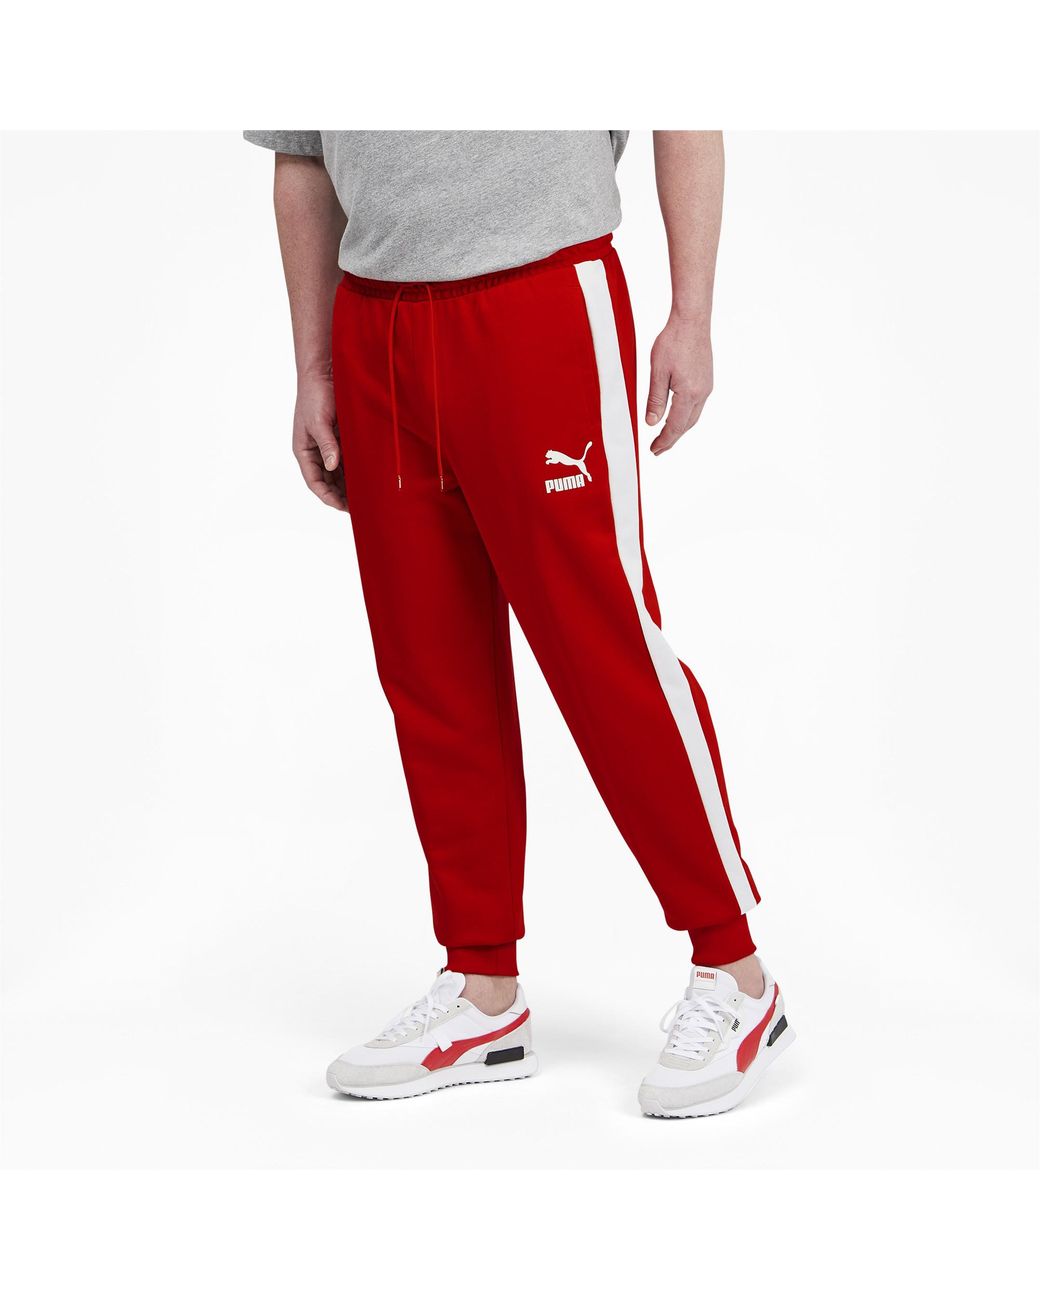 PUMA Iconic T7 Track Pants Bt in Red for Men - Lyst